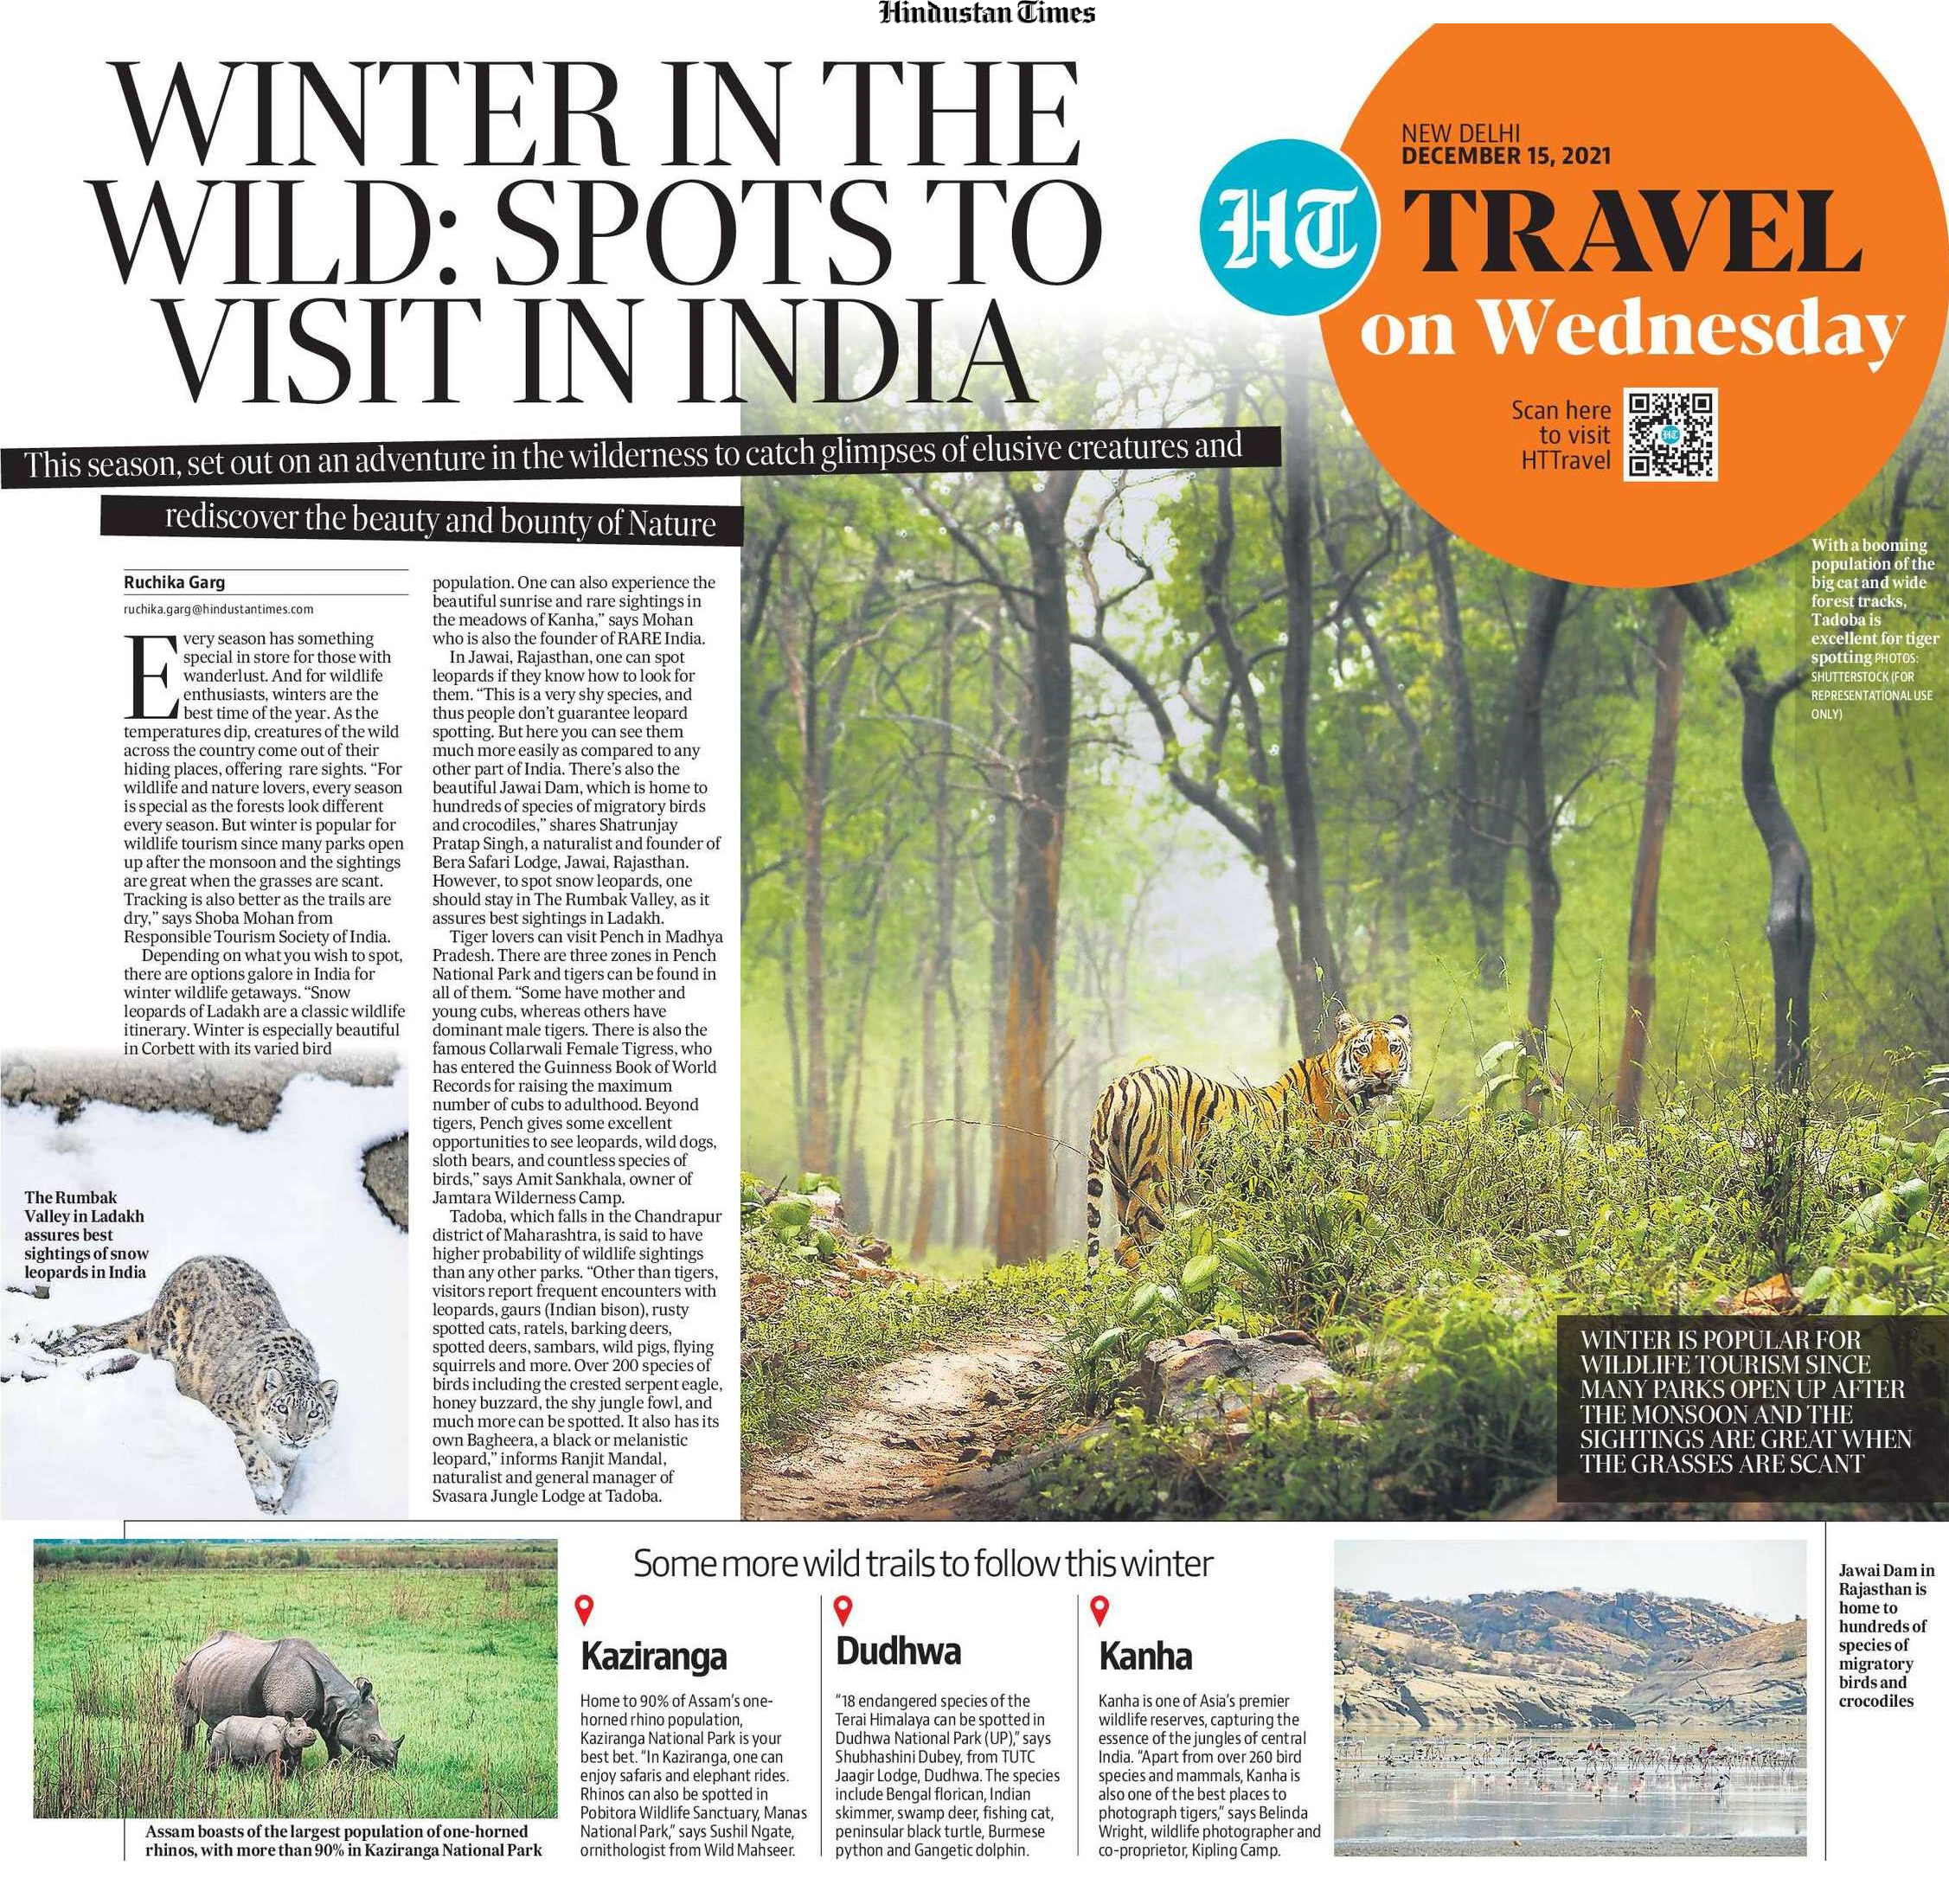 Winter in the Wild: Spots to visit in India